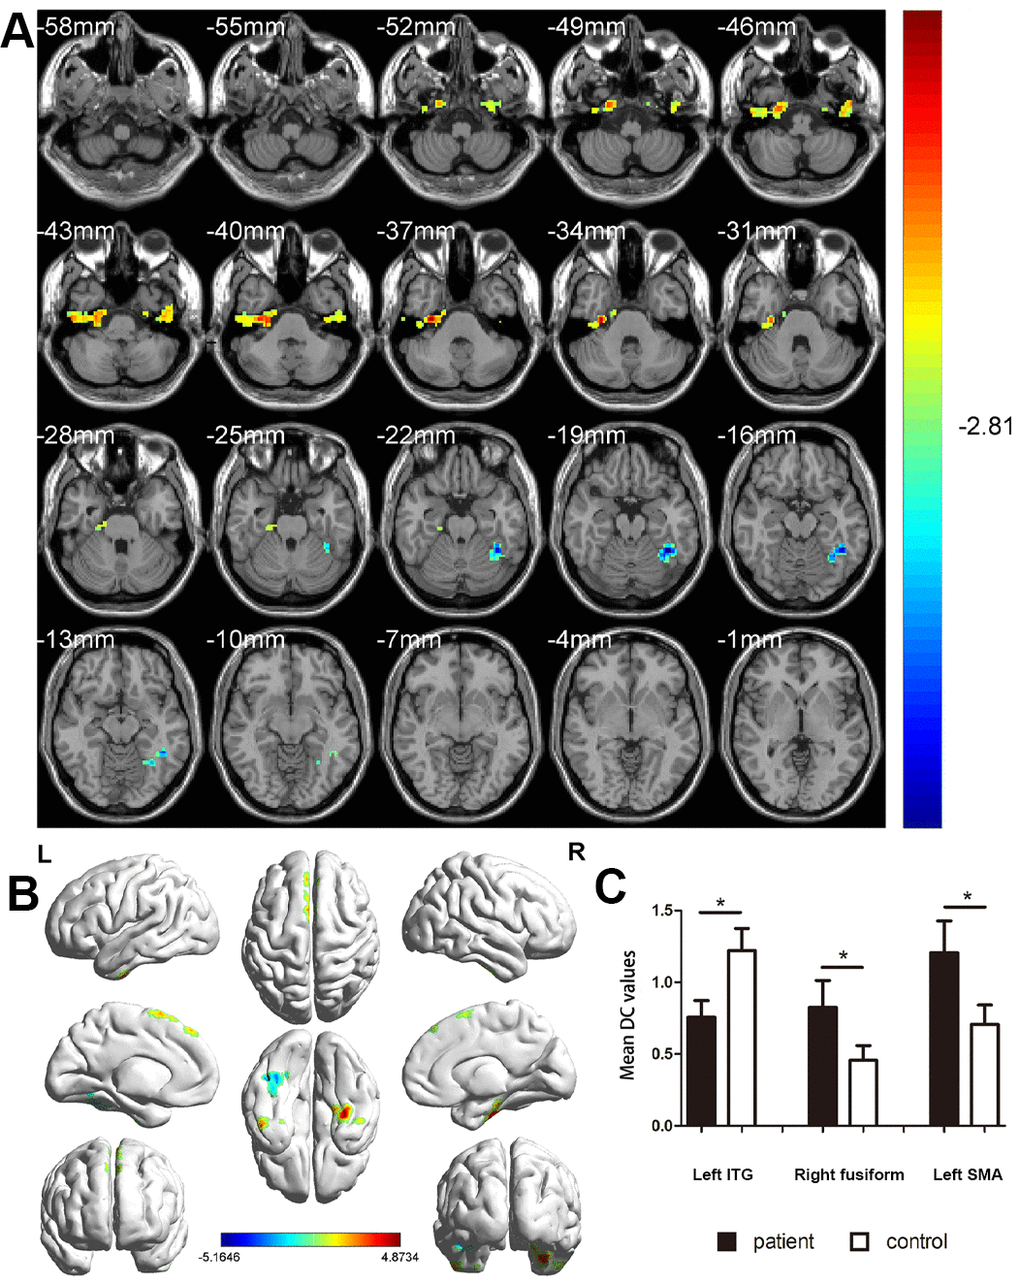 Comparison of DC values in MCI and HC groups. (A) Differences in DC were found in left ITG, right fusiform gyrus, and left SMA. (B) The stereoscopic form of the cerebrum. The red area indicates an increase in DC value; the blue indicates a decrease in DC value. (GRF correction, the cluster-level: PC) The Mean DC value between MCIs and control group. Abbreviations: DC, Degree centrality; MCI, mild cognitive impairment; HC, healthy controls; ITG, inferior temporal gyrus; SMA, supplementary motor area.